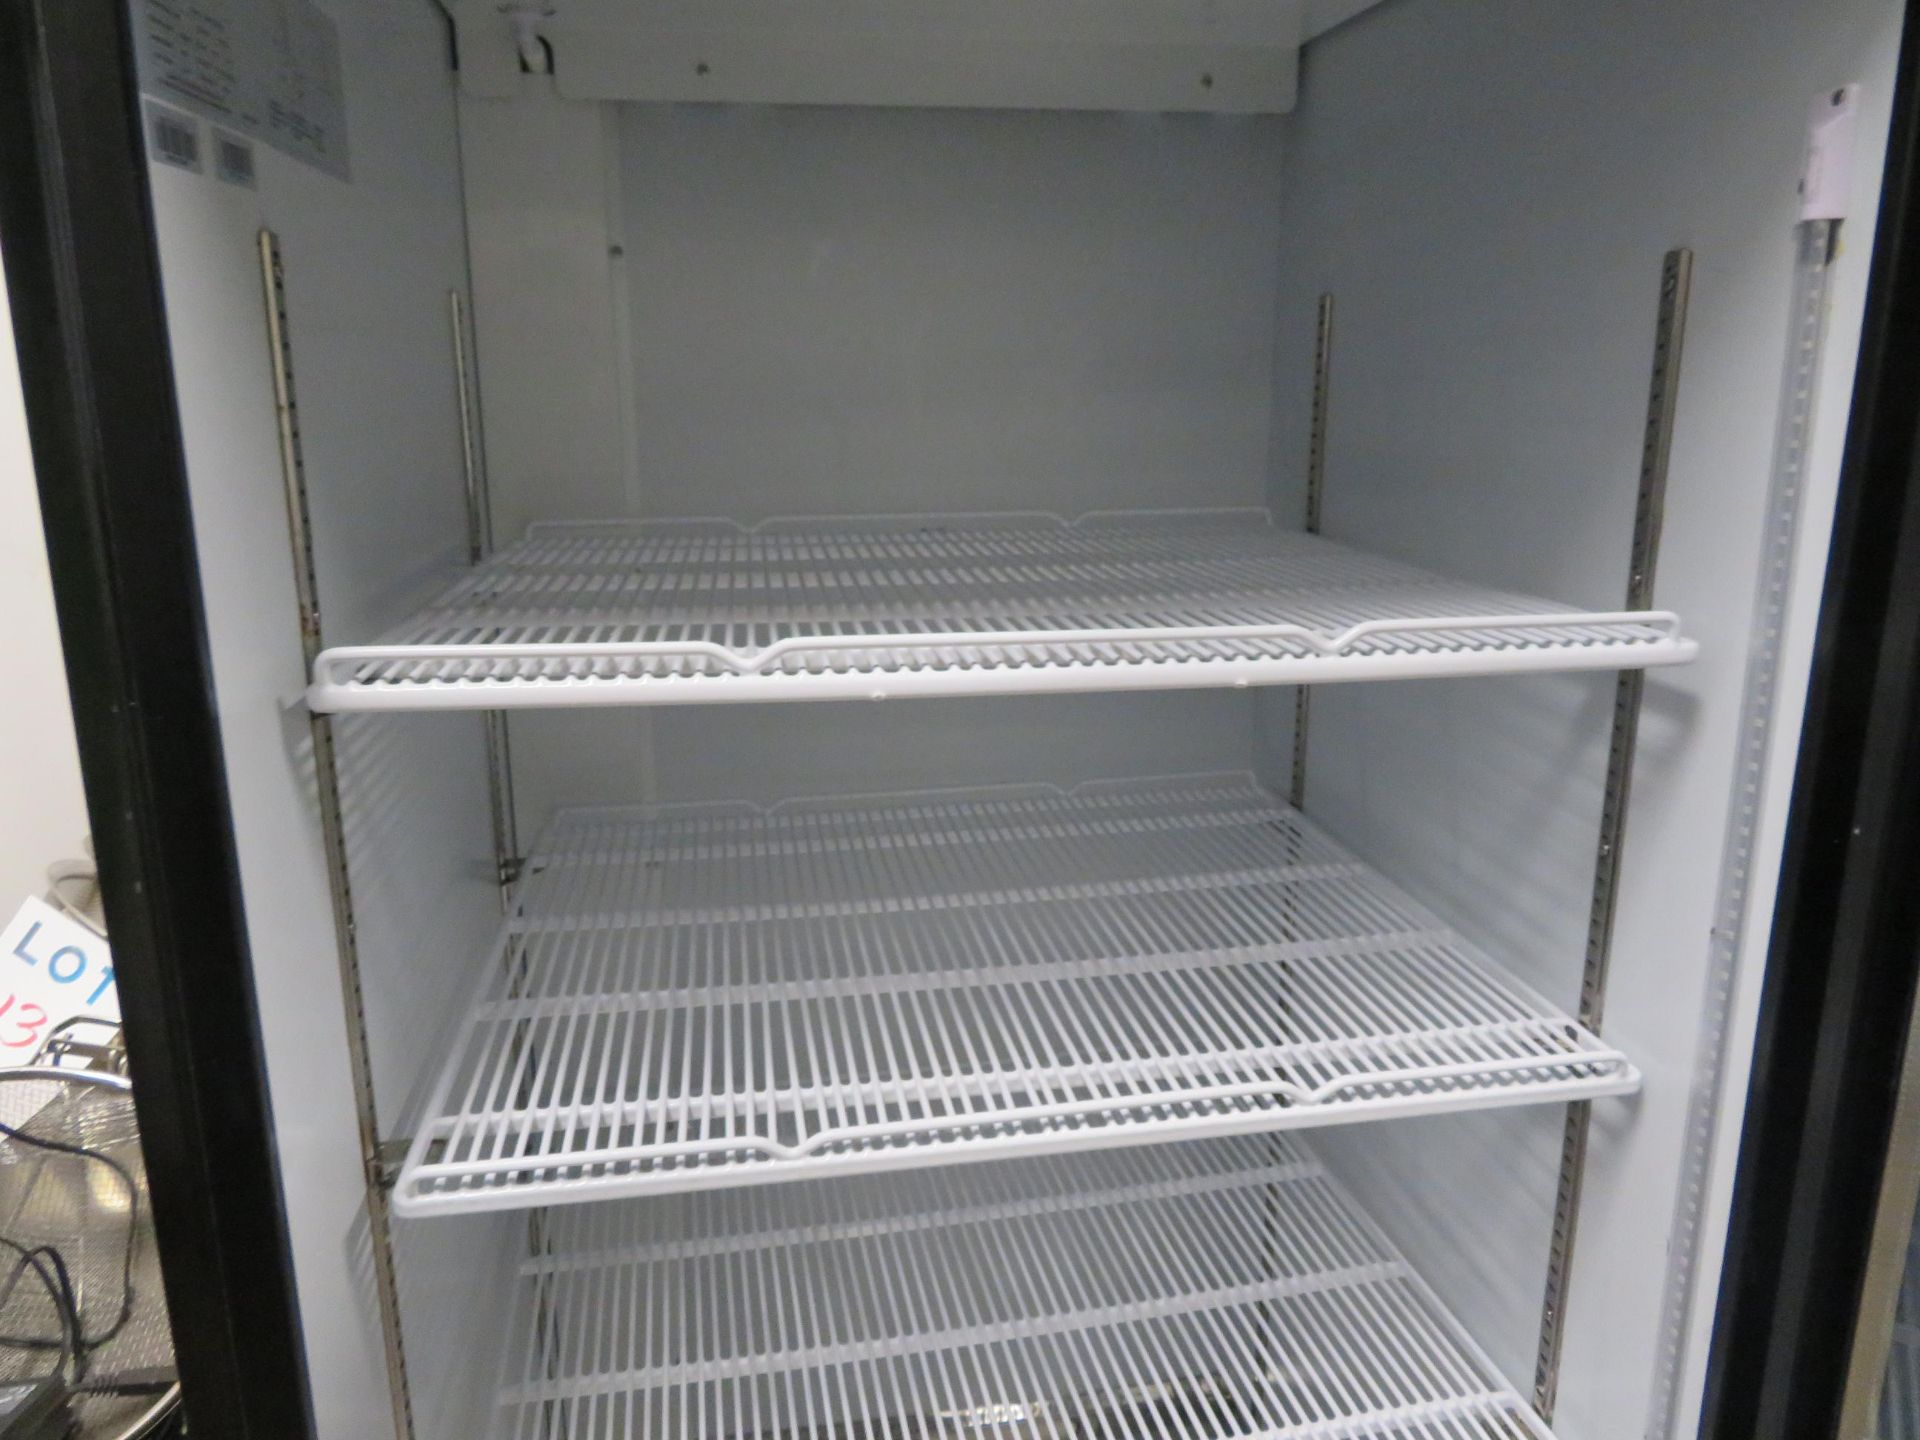 NEW AIR 1 door glass upright refrigerator on wheels, Mod # NGR-068H, approx. 30"w x 30"d x 79"h - Image 3 of 4